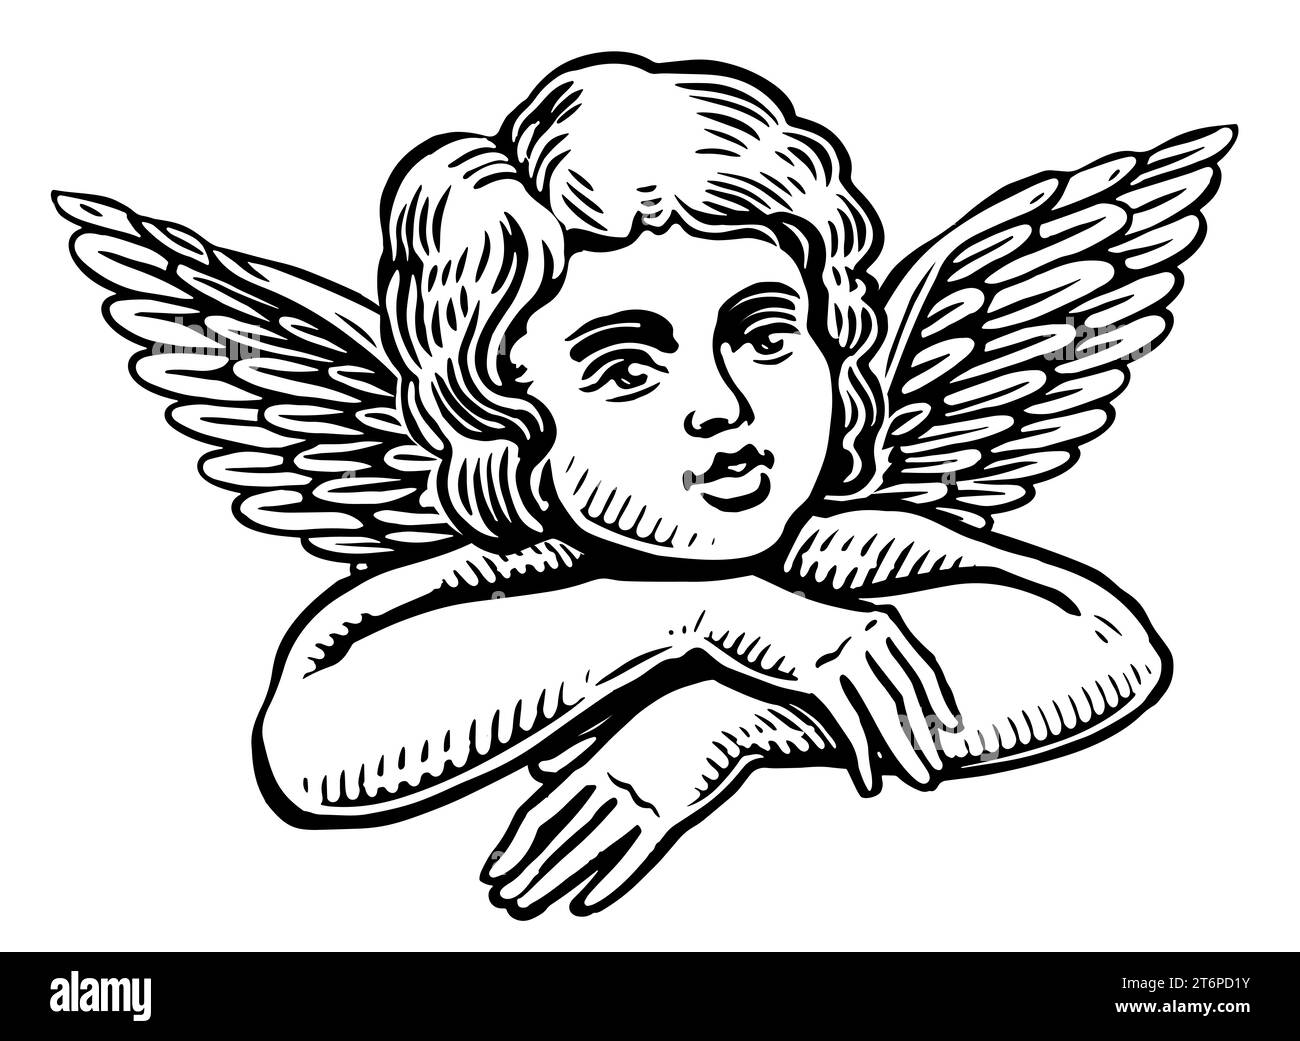 Cute baby angel with wings. Hand drawn Cherub sketch engraving style illustration Stock Photo